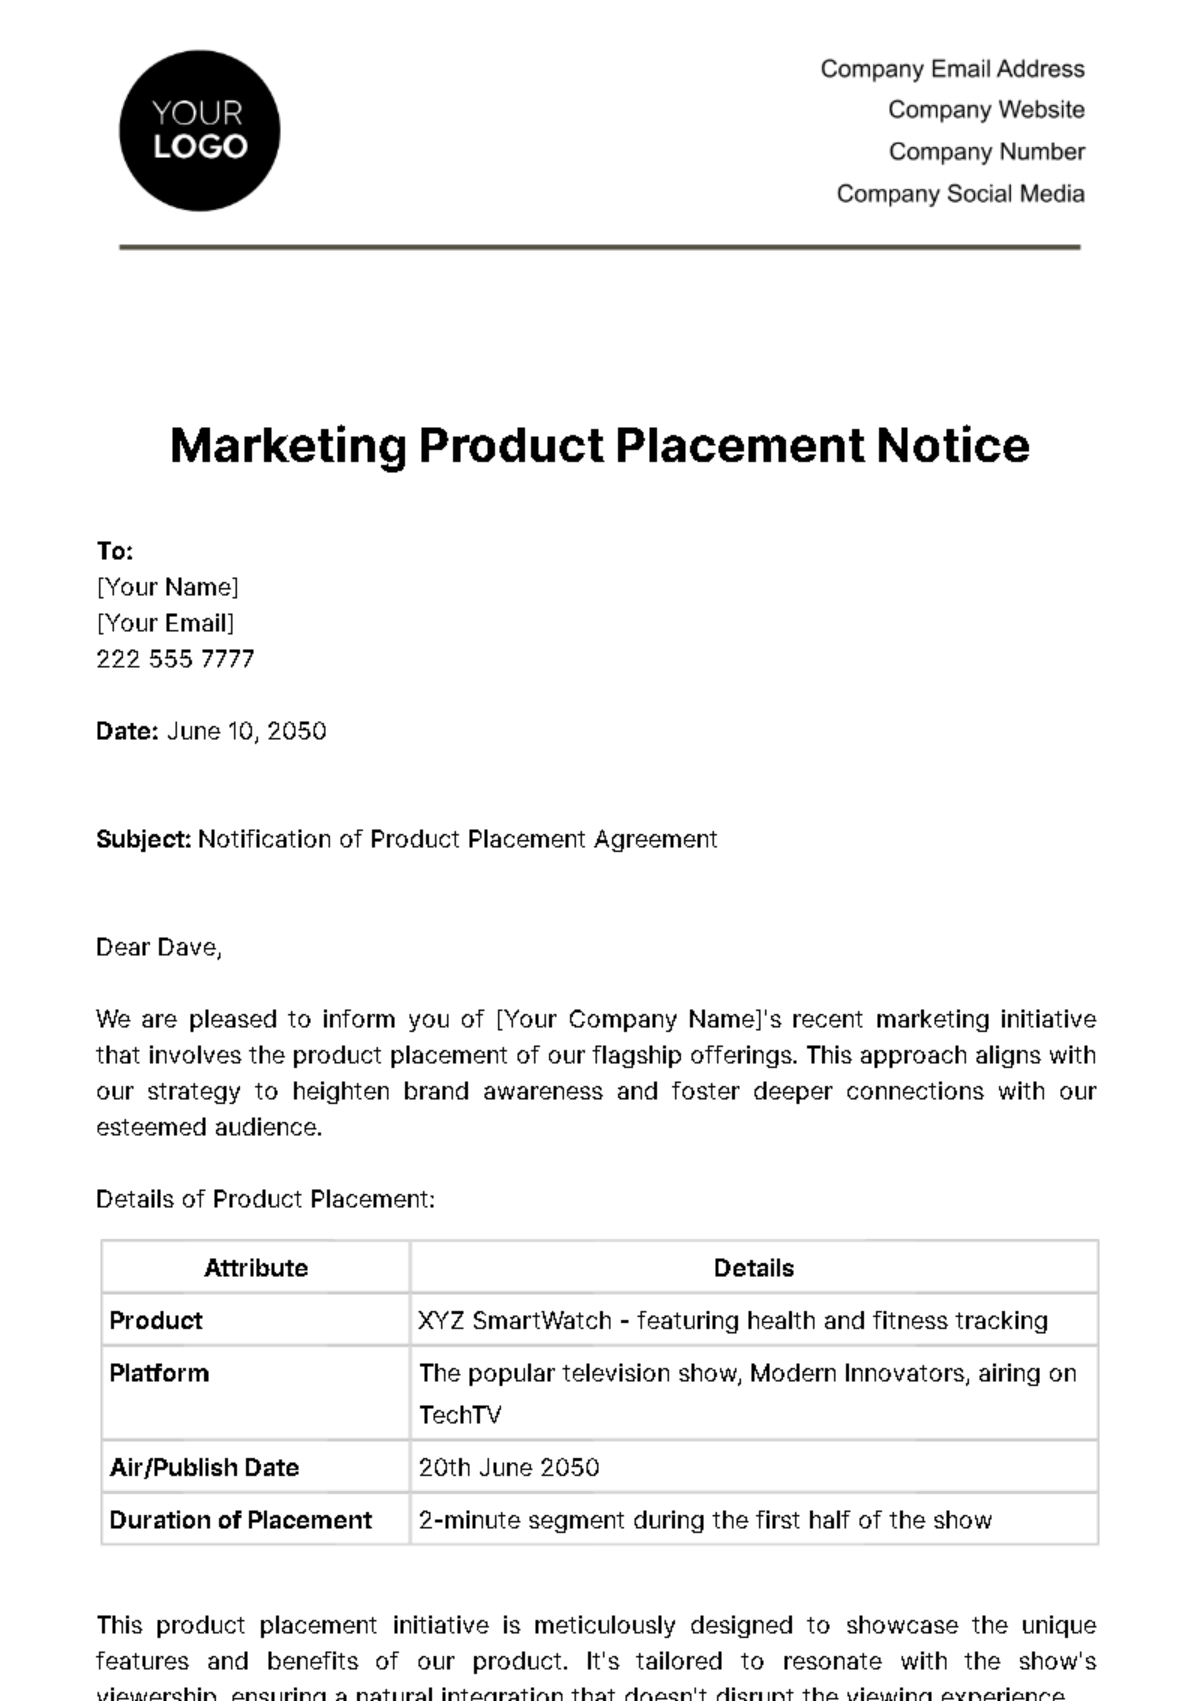 Free Marketing Product Placement Notice Template